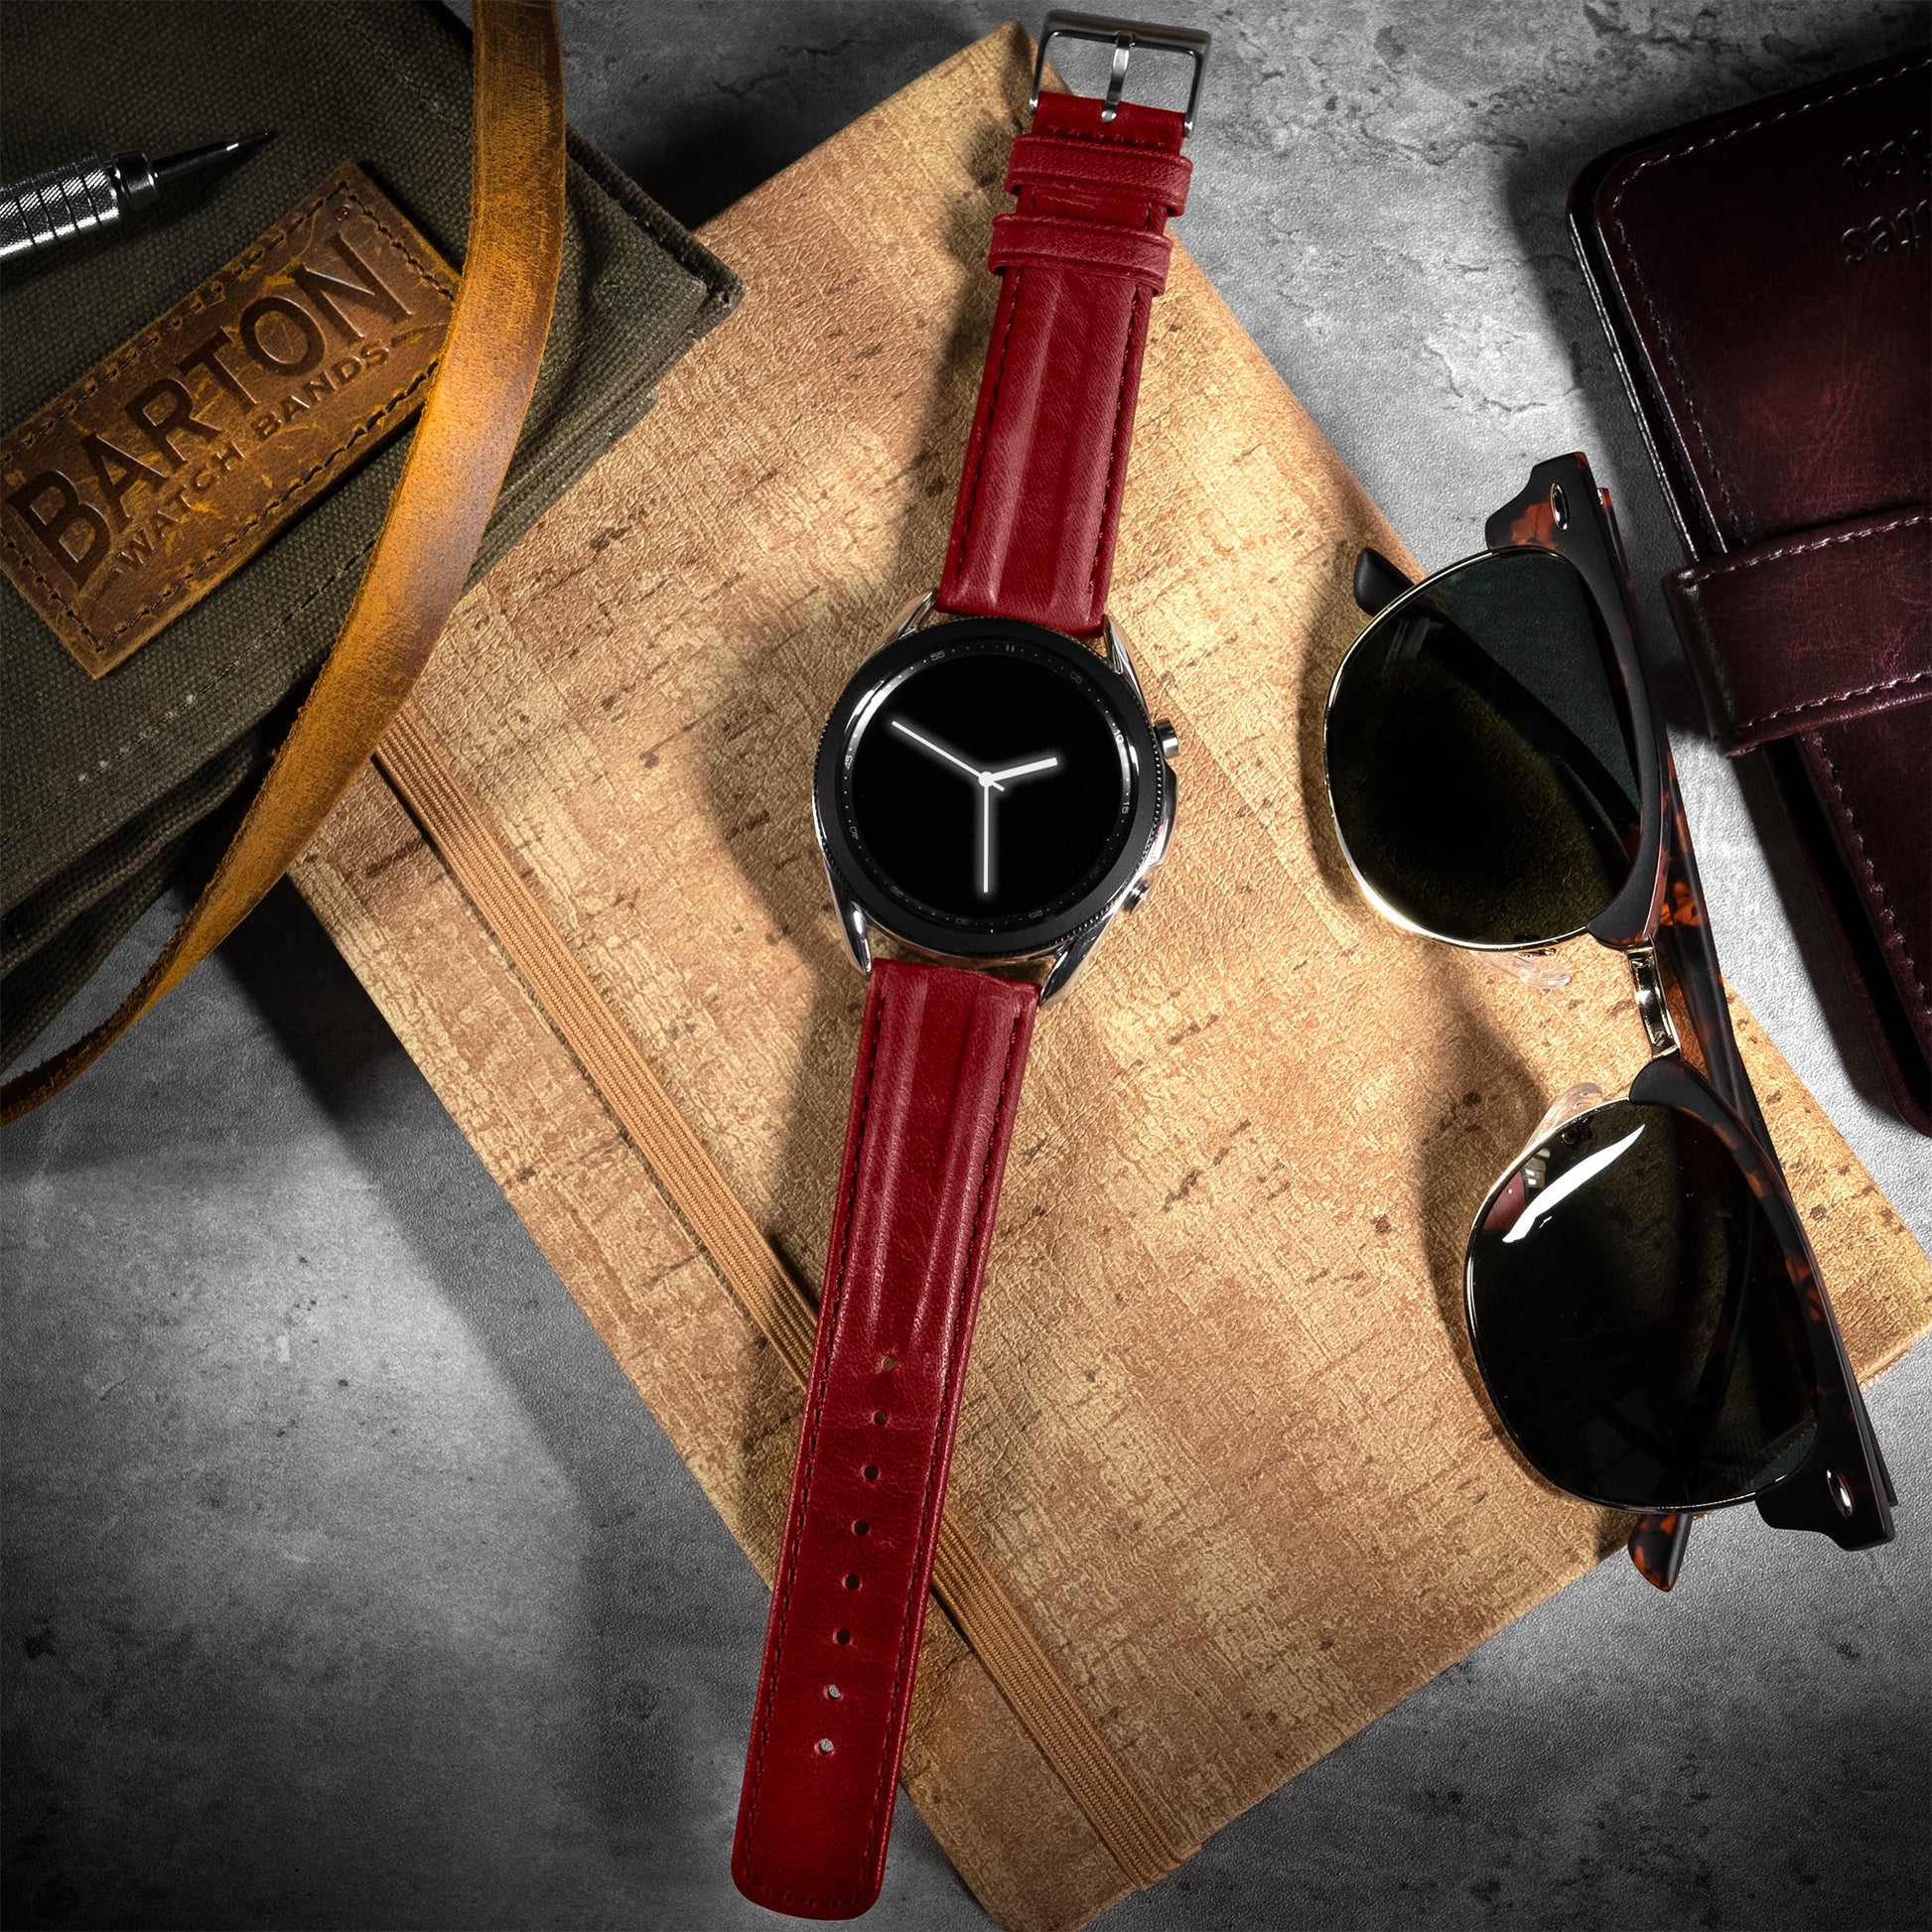 Samsung Galaxy Watch Active | Classic Horween Leather | Crimson Red - Barton Watch Bands